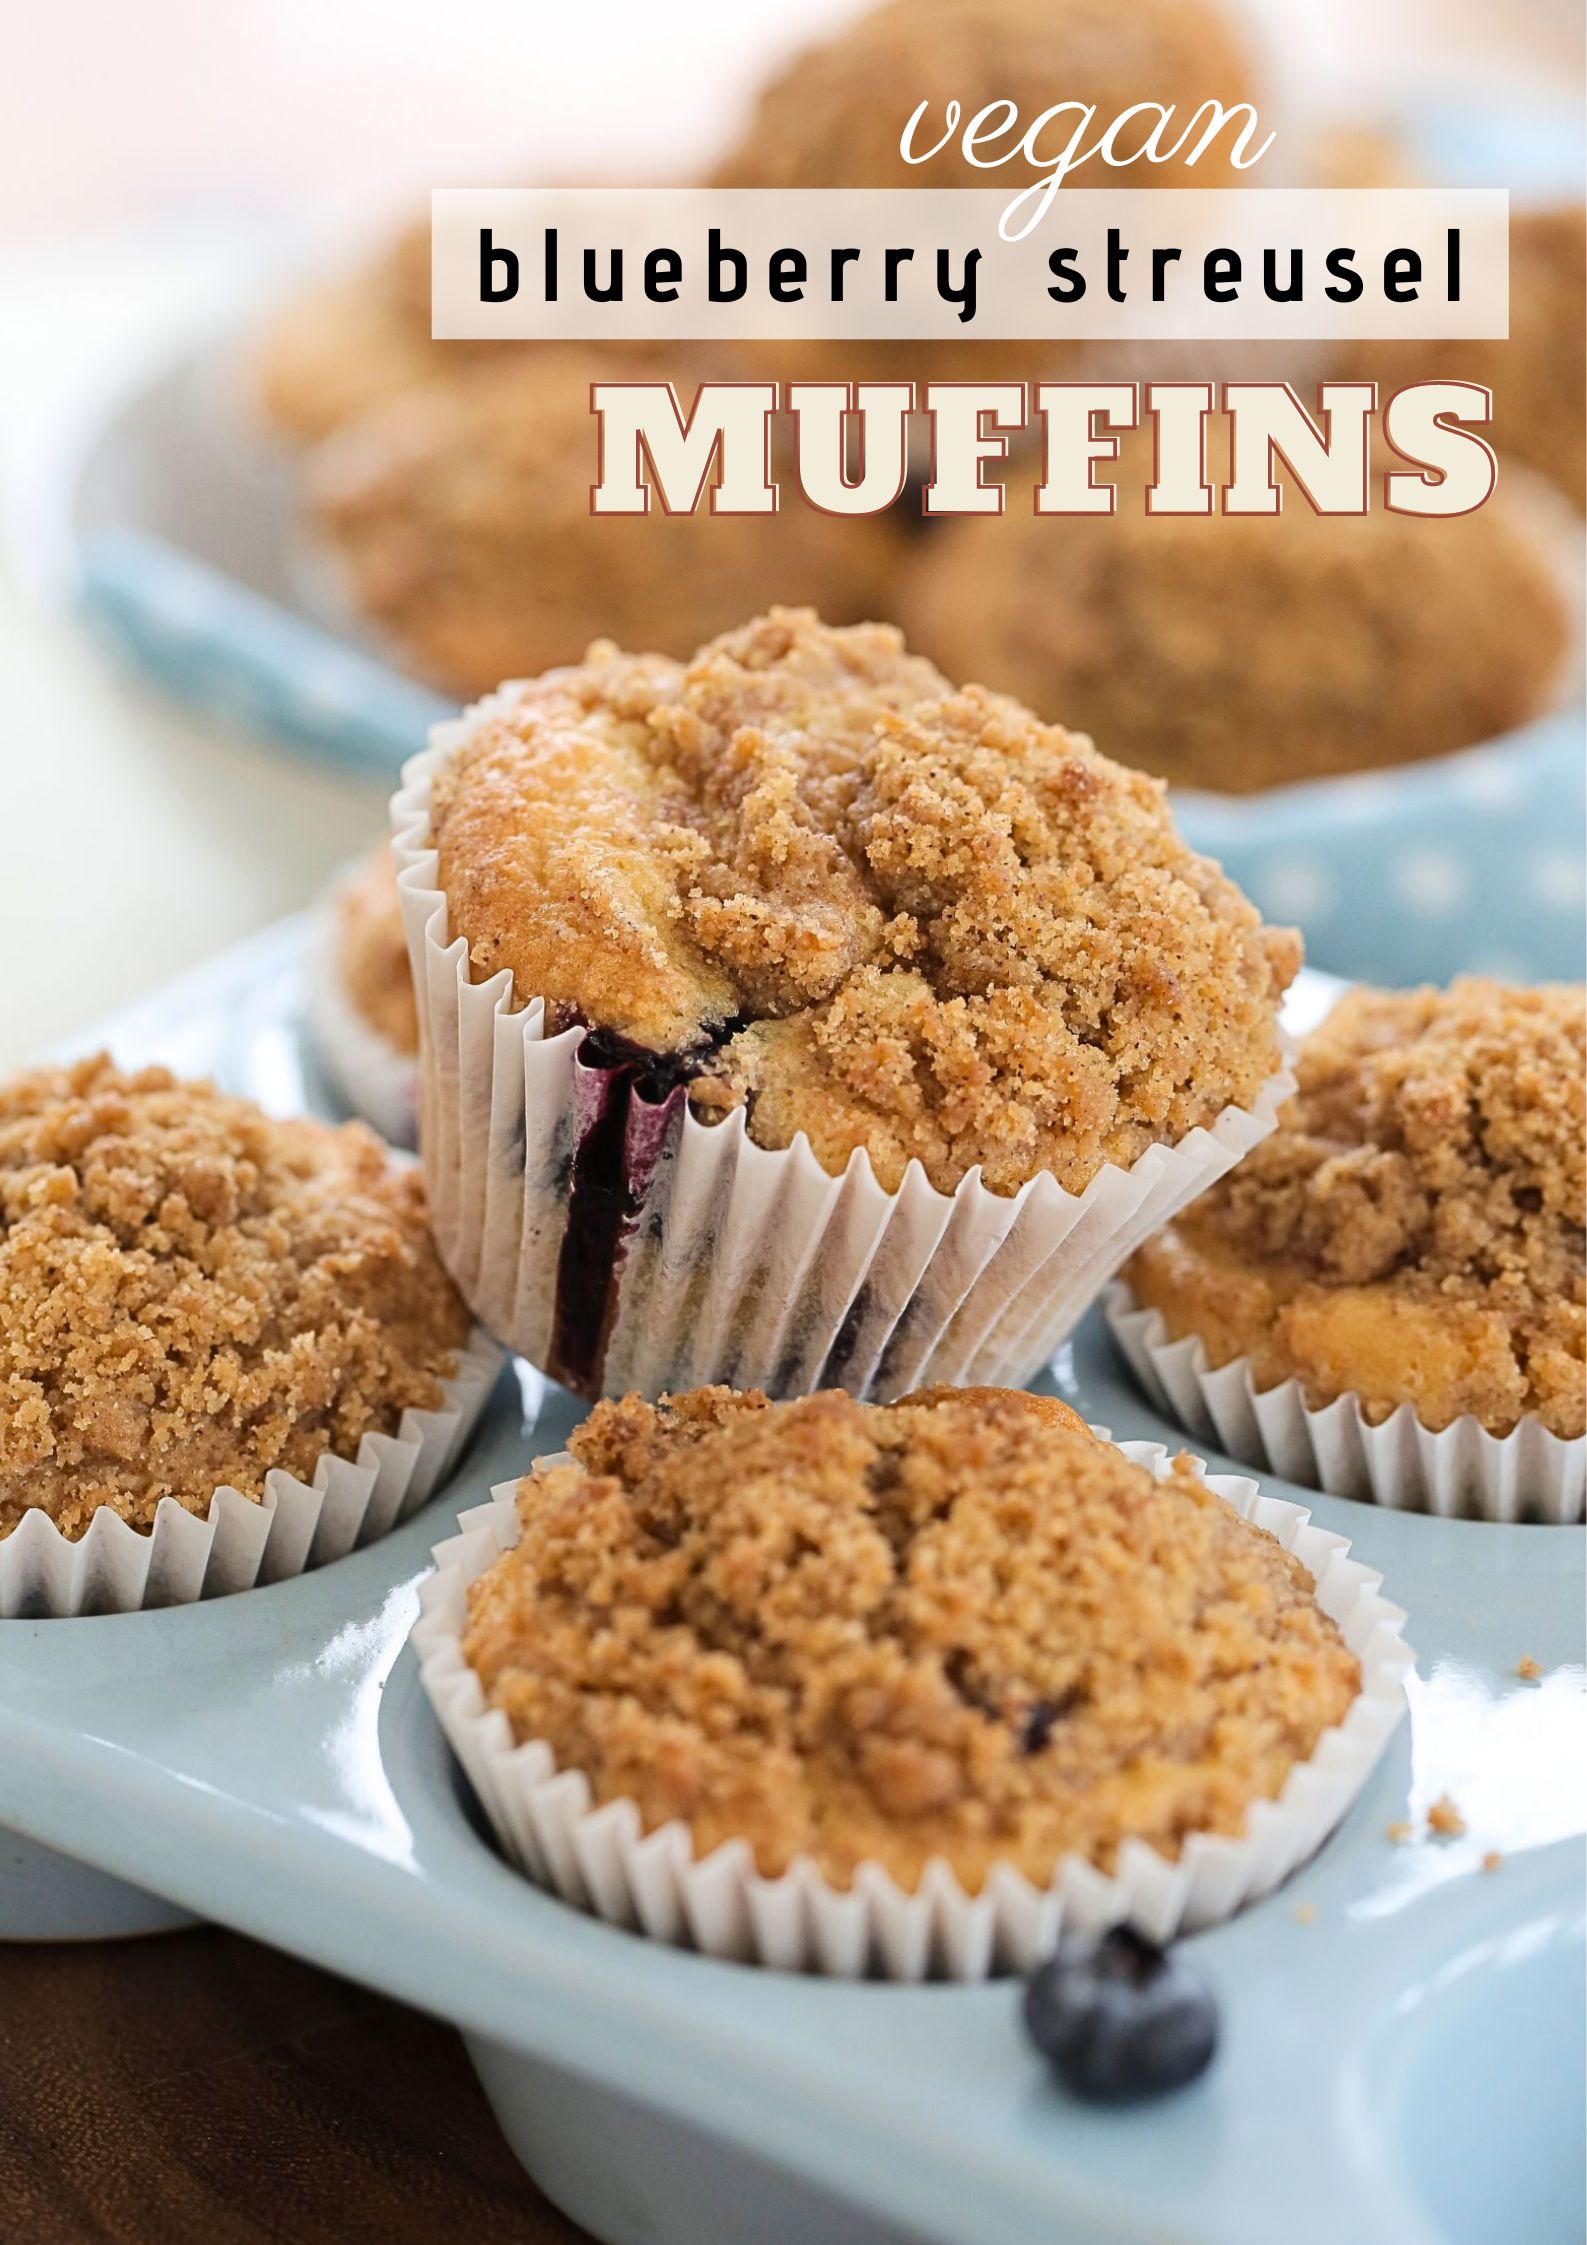 Bursting with juicy blueberries and a topped with a sweet, crisp crumble, these vegan blueberry streusel muffins are a delightful way to start your day | #VeganBlueberryMuffins #StreuselMuffins #PlantBasedBaking #VeganRecipes #DairyFree #EggFree